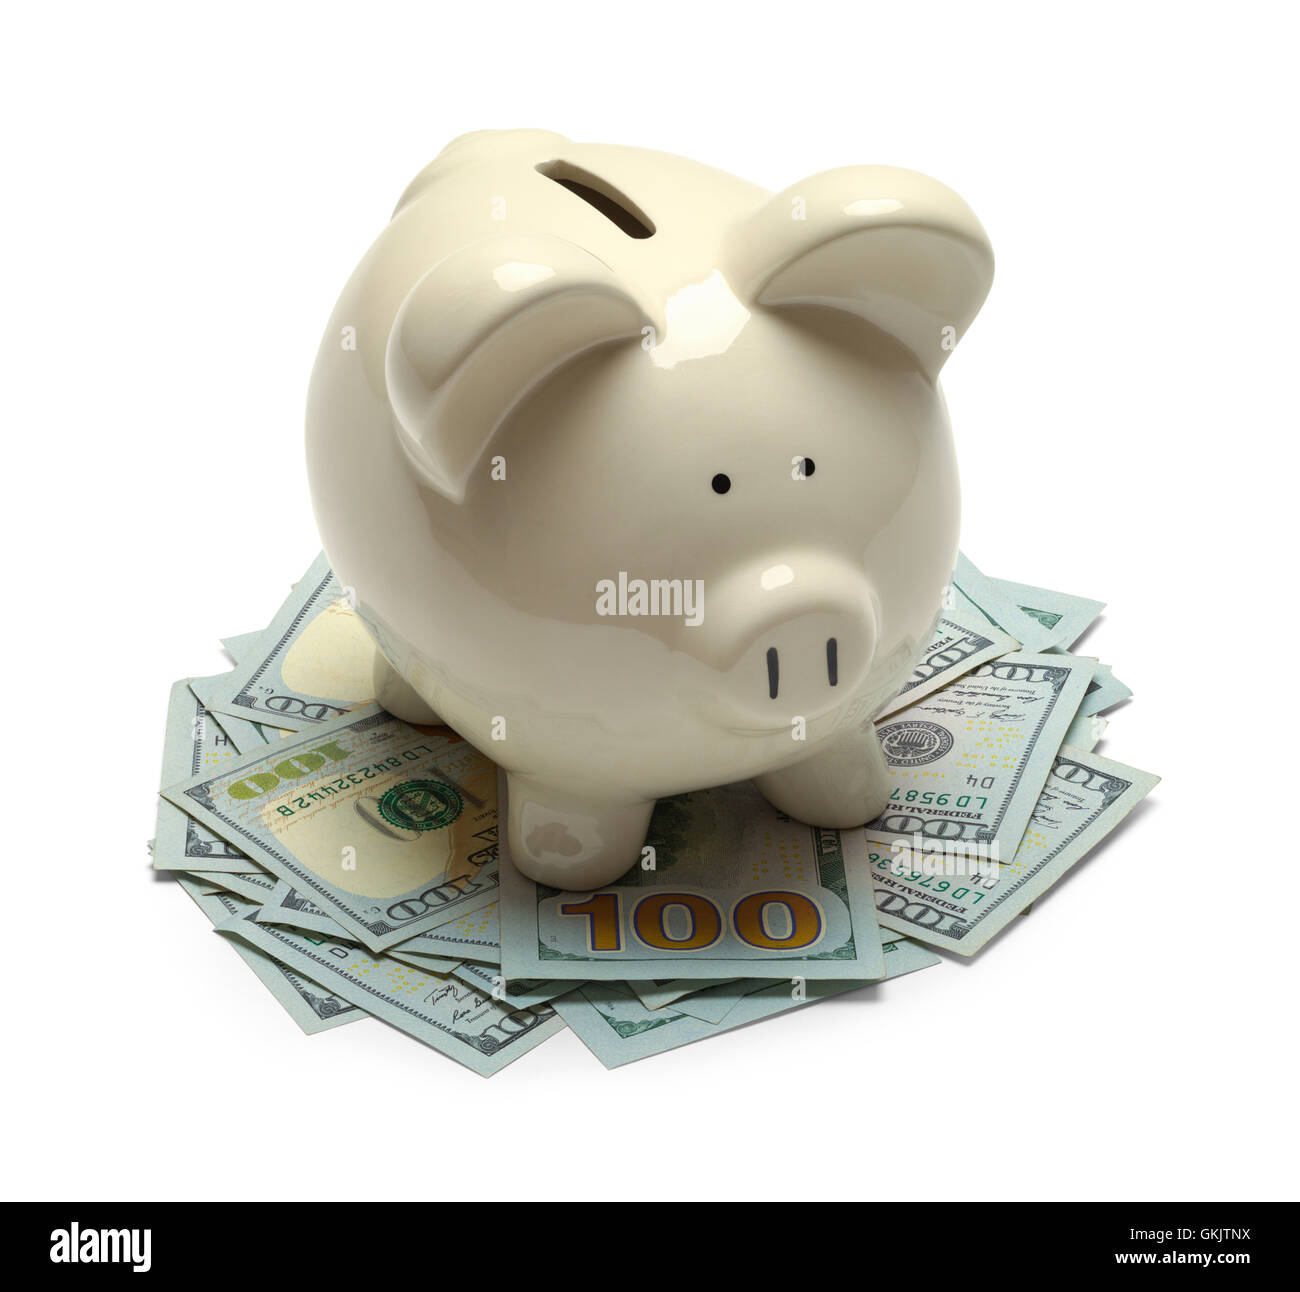 Piggy Bank Standing on Cash Money Isolated on White Background. Stock Photo